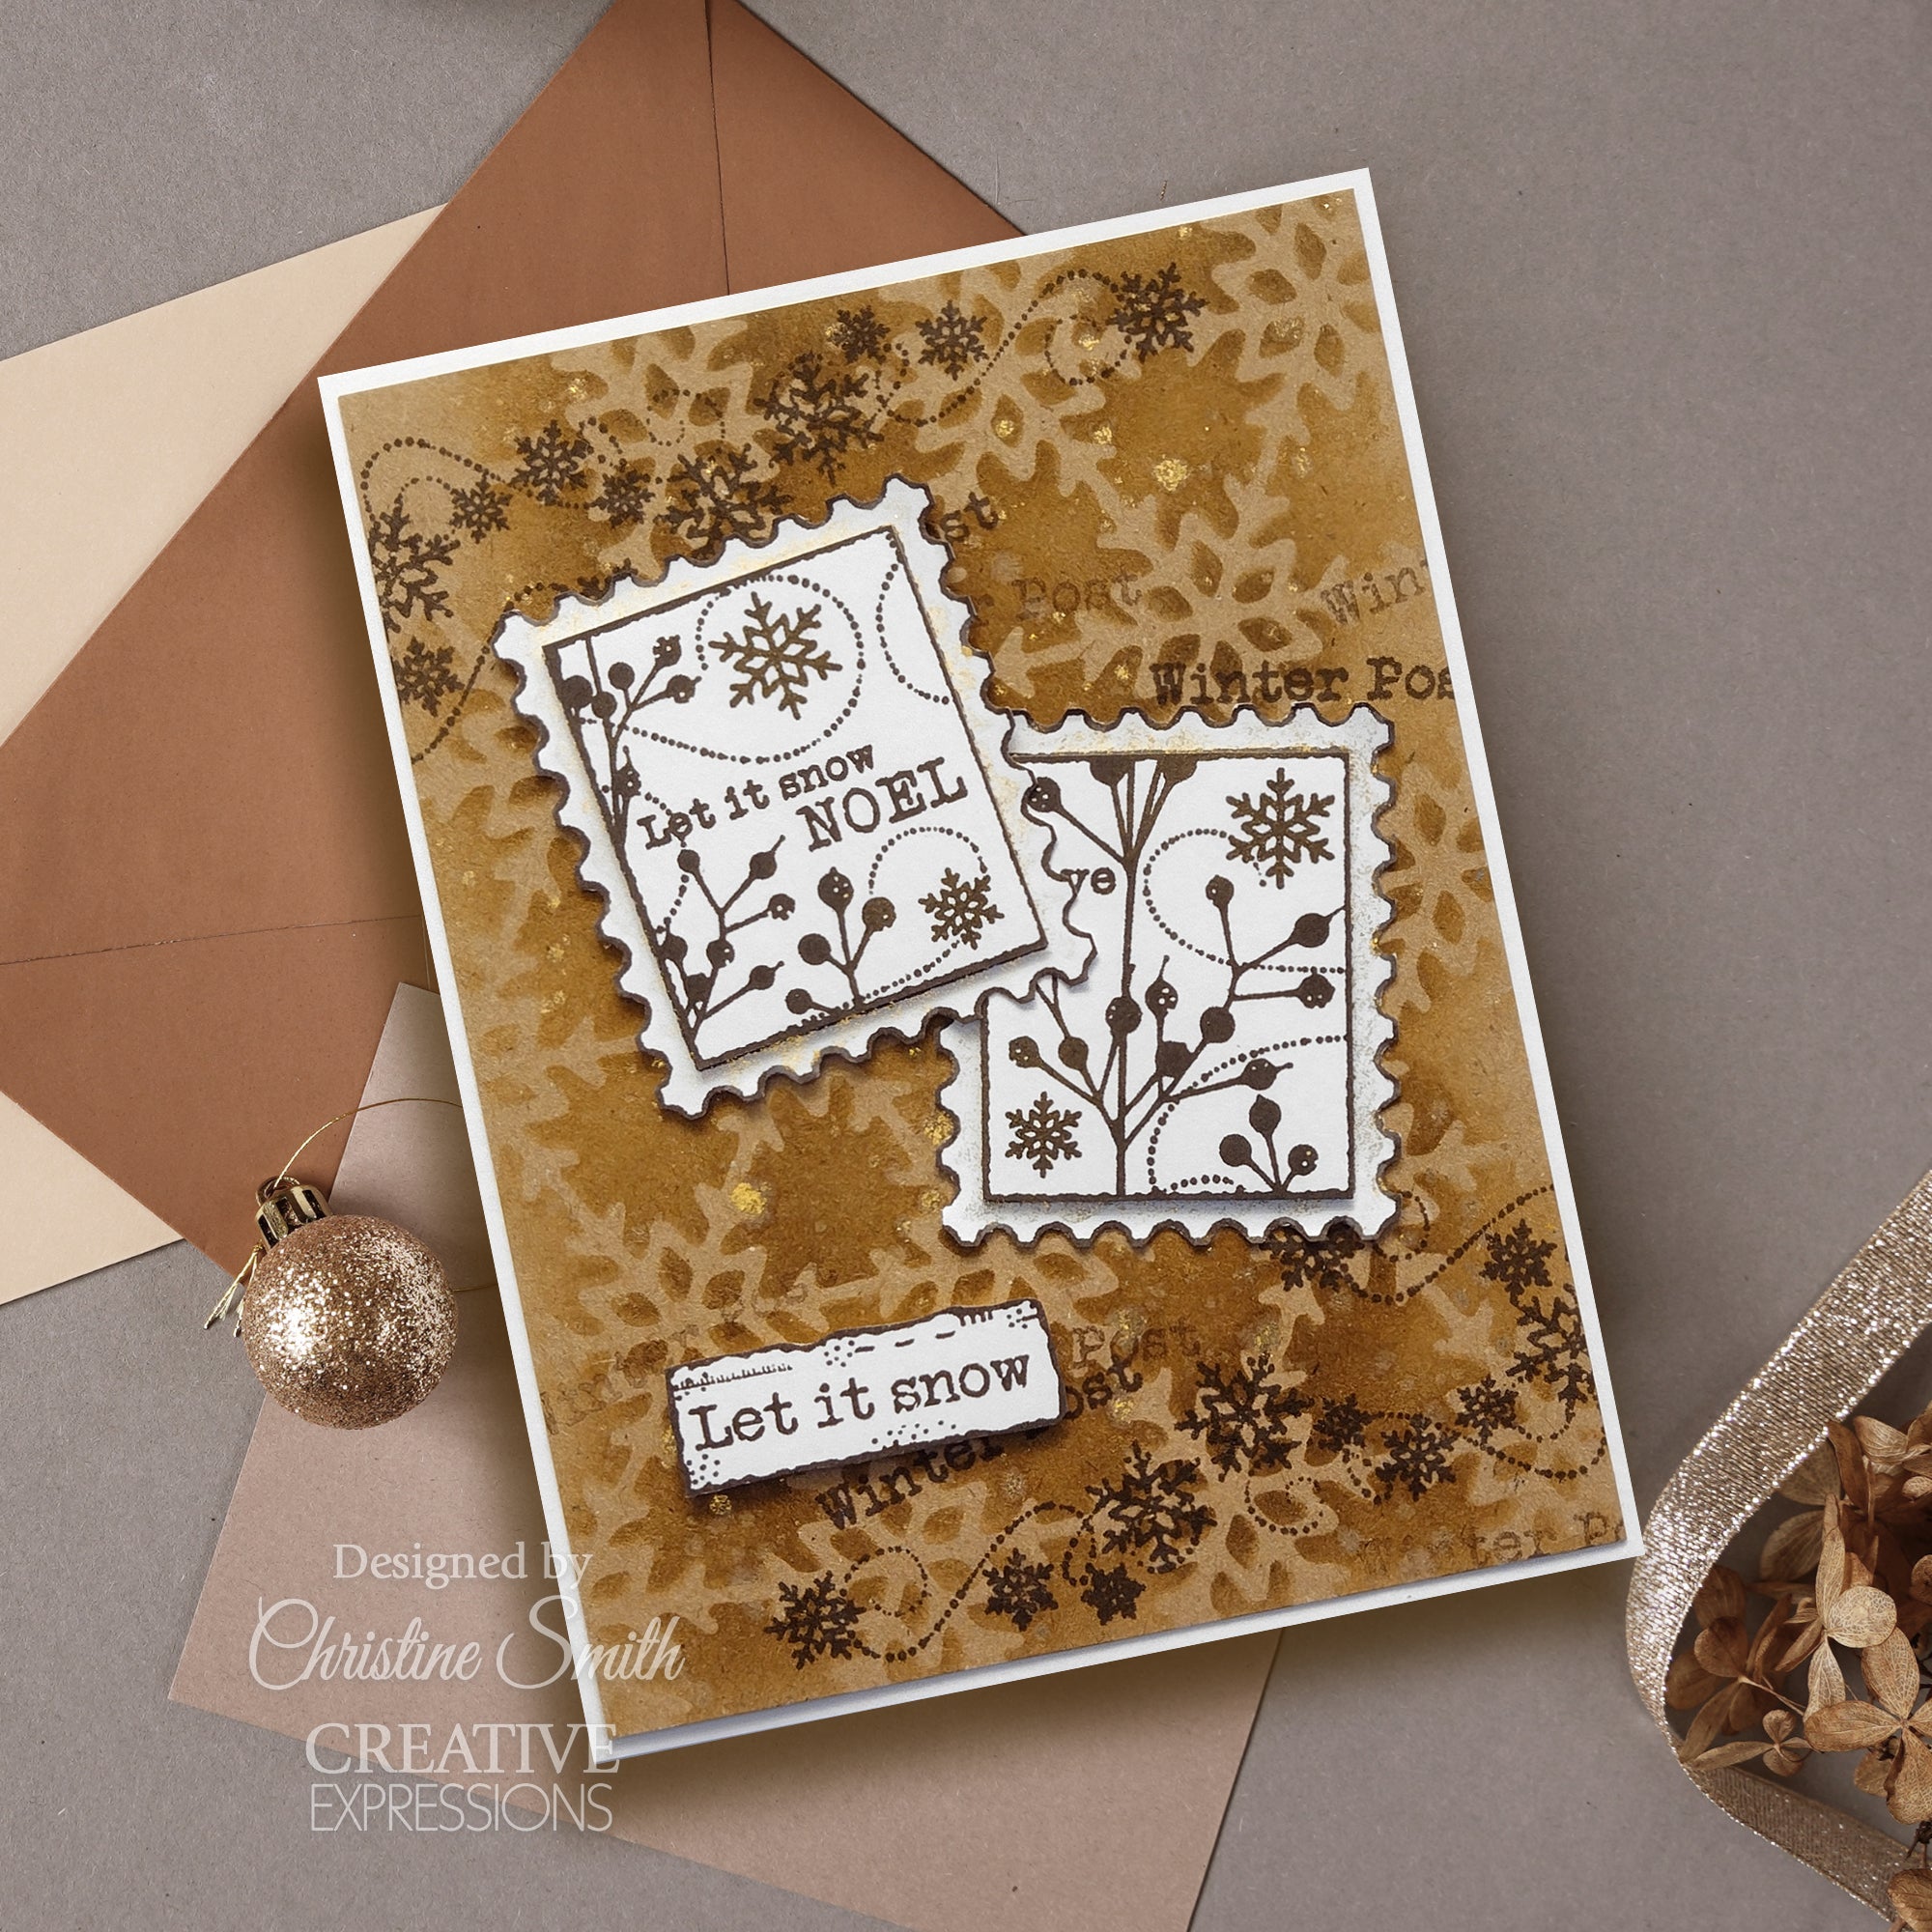 Woodware Clear Singles Winter Postage 4 in x 6 in Stamp Set